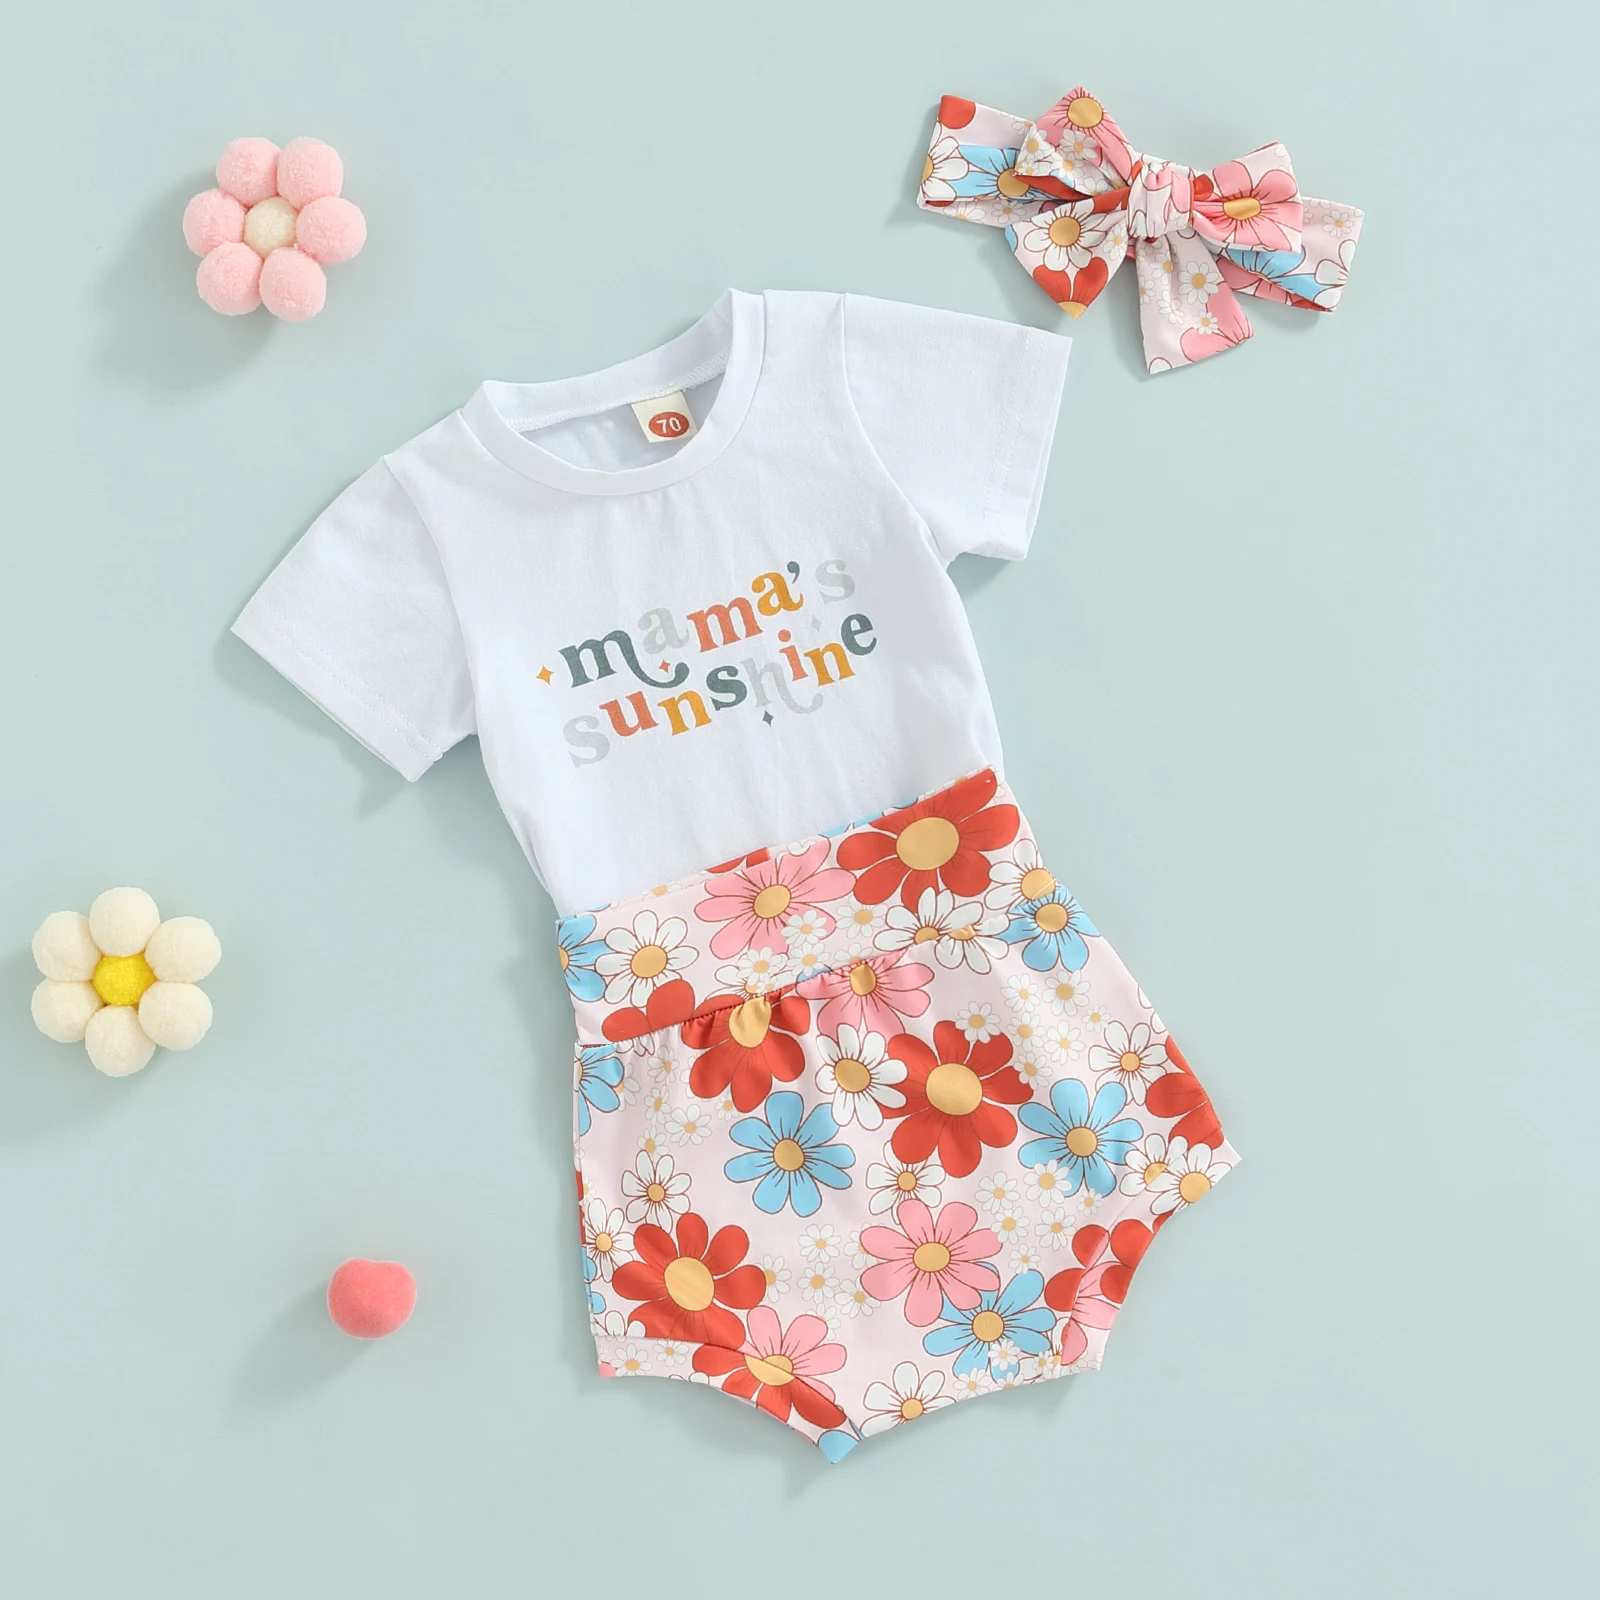 baby dress and set 2022 0-24M Infant Girl Summer Clothing Mama Sunshine Letter Print Round Neck Short Sleeve Top+Floral High Waist Shorts Cute 3pcs baby outfit matching set